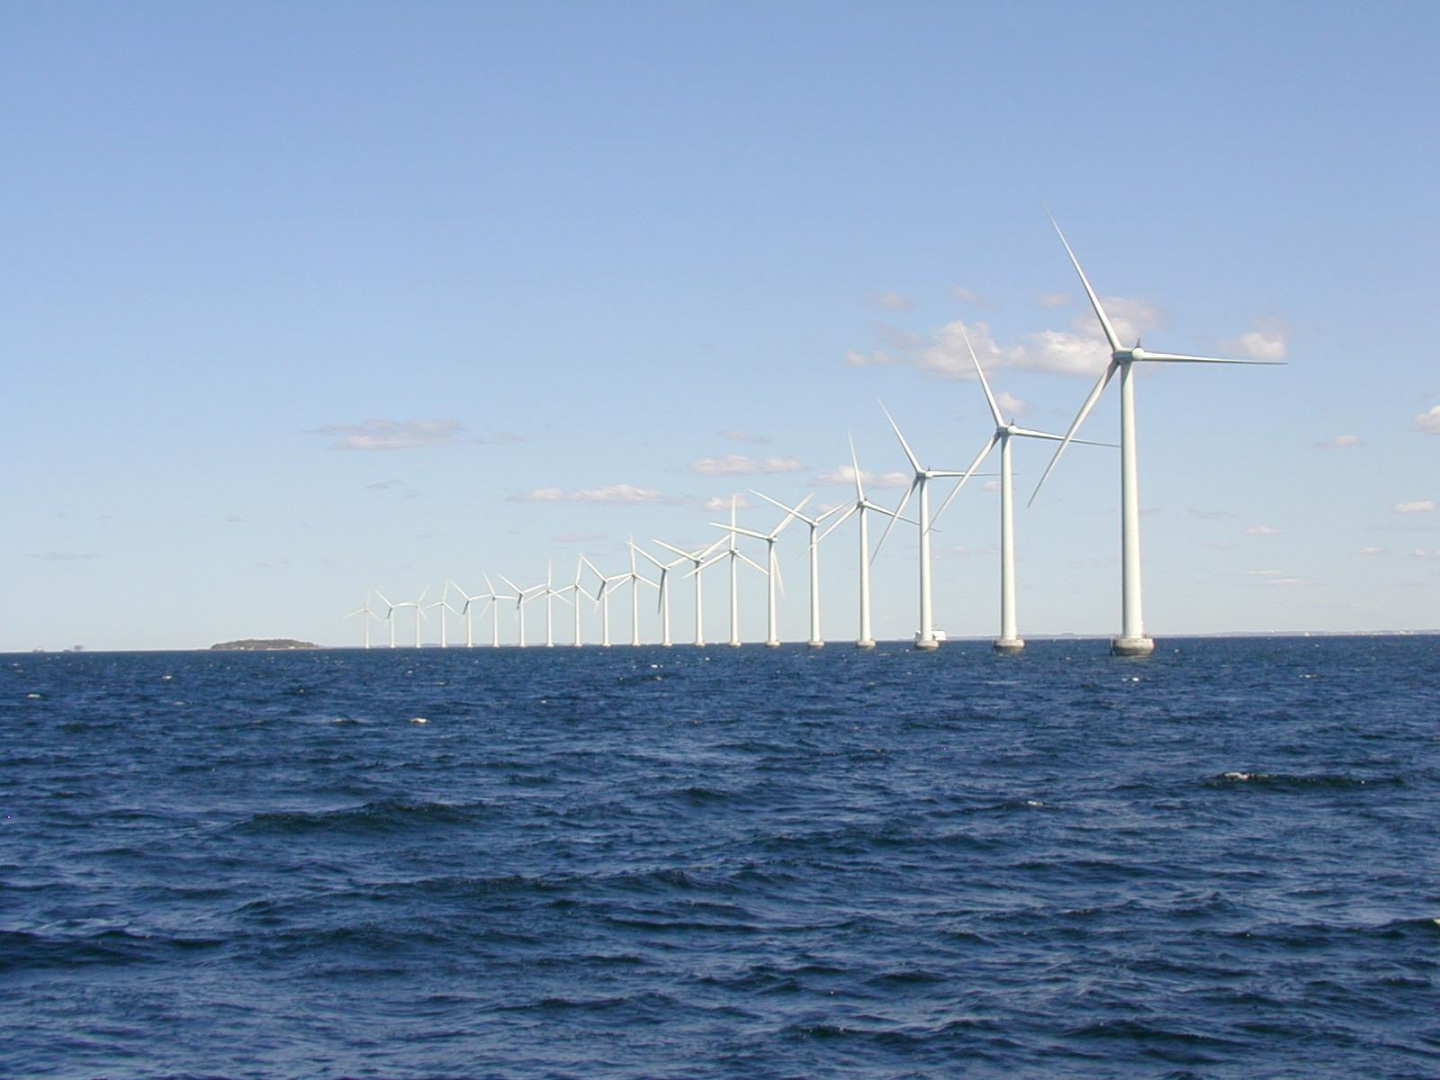 Offshore windfarm featuring a line of turbines in the ocean.